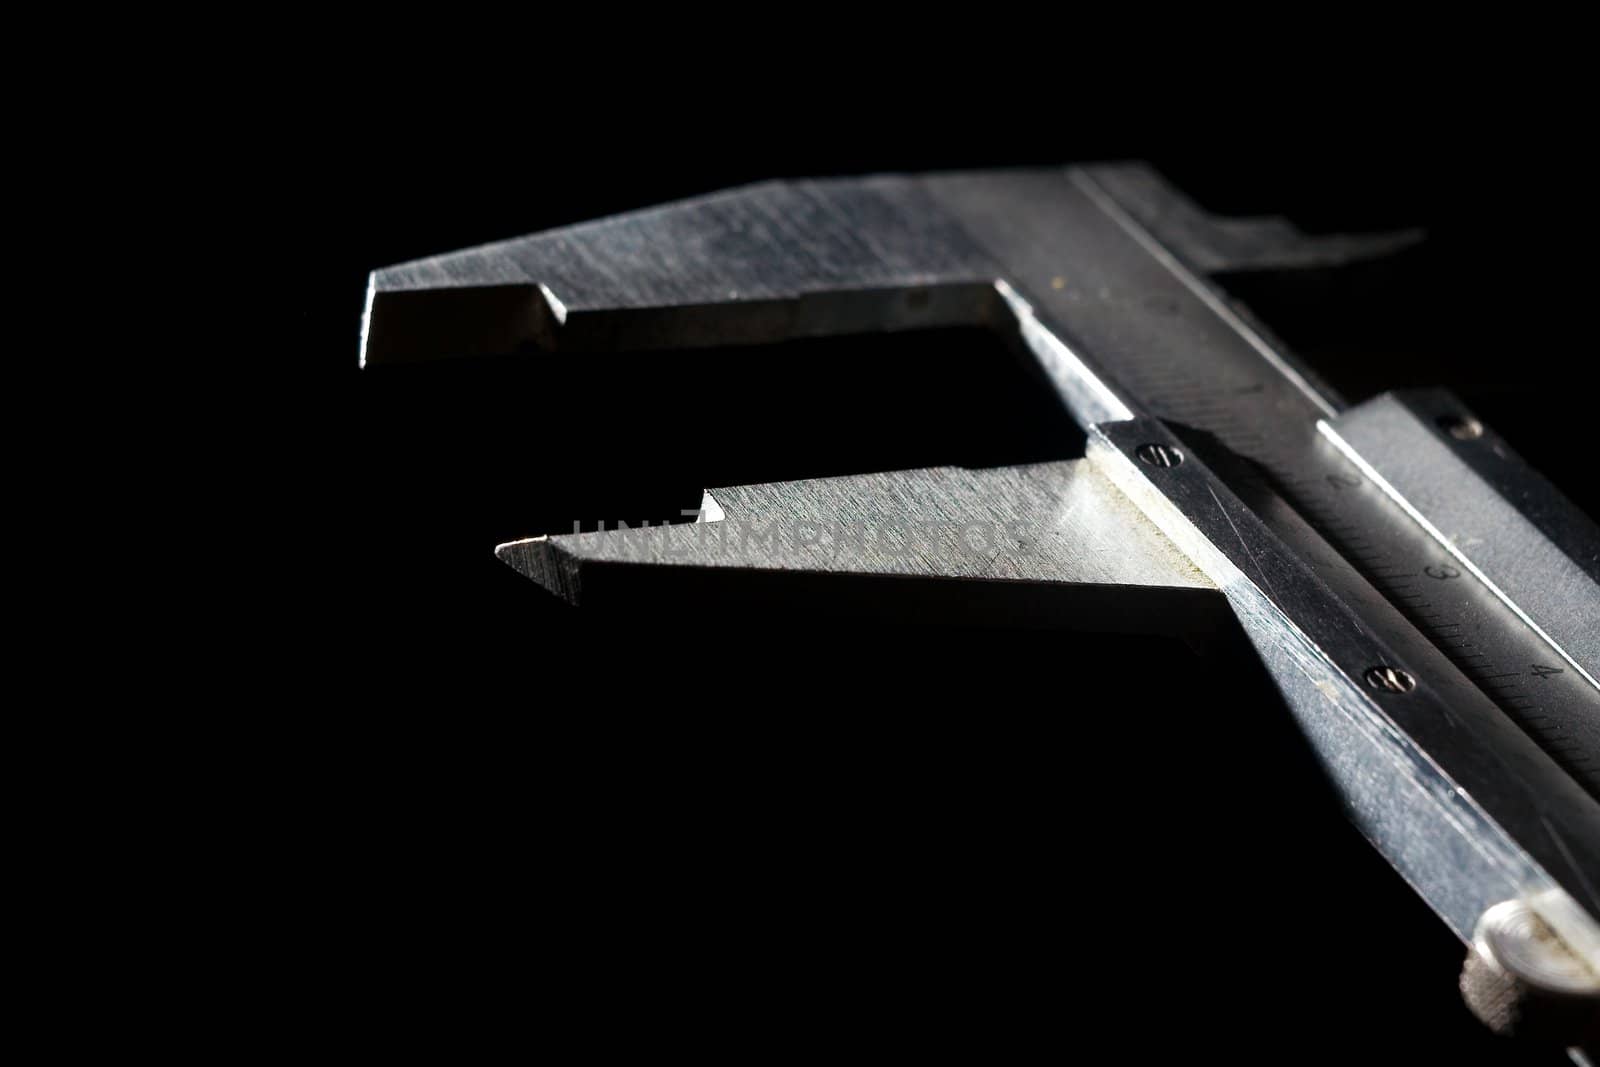 Stainless steel caliper on black background. Closeup